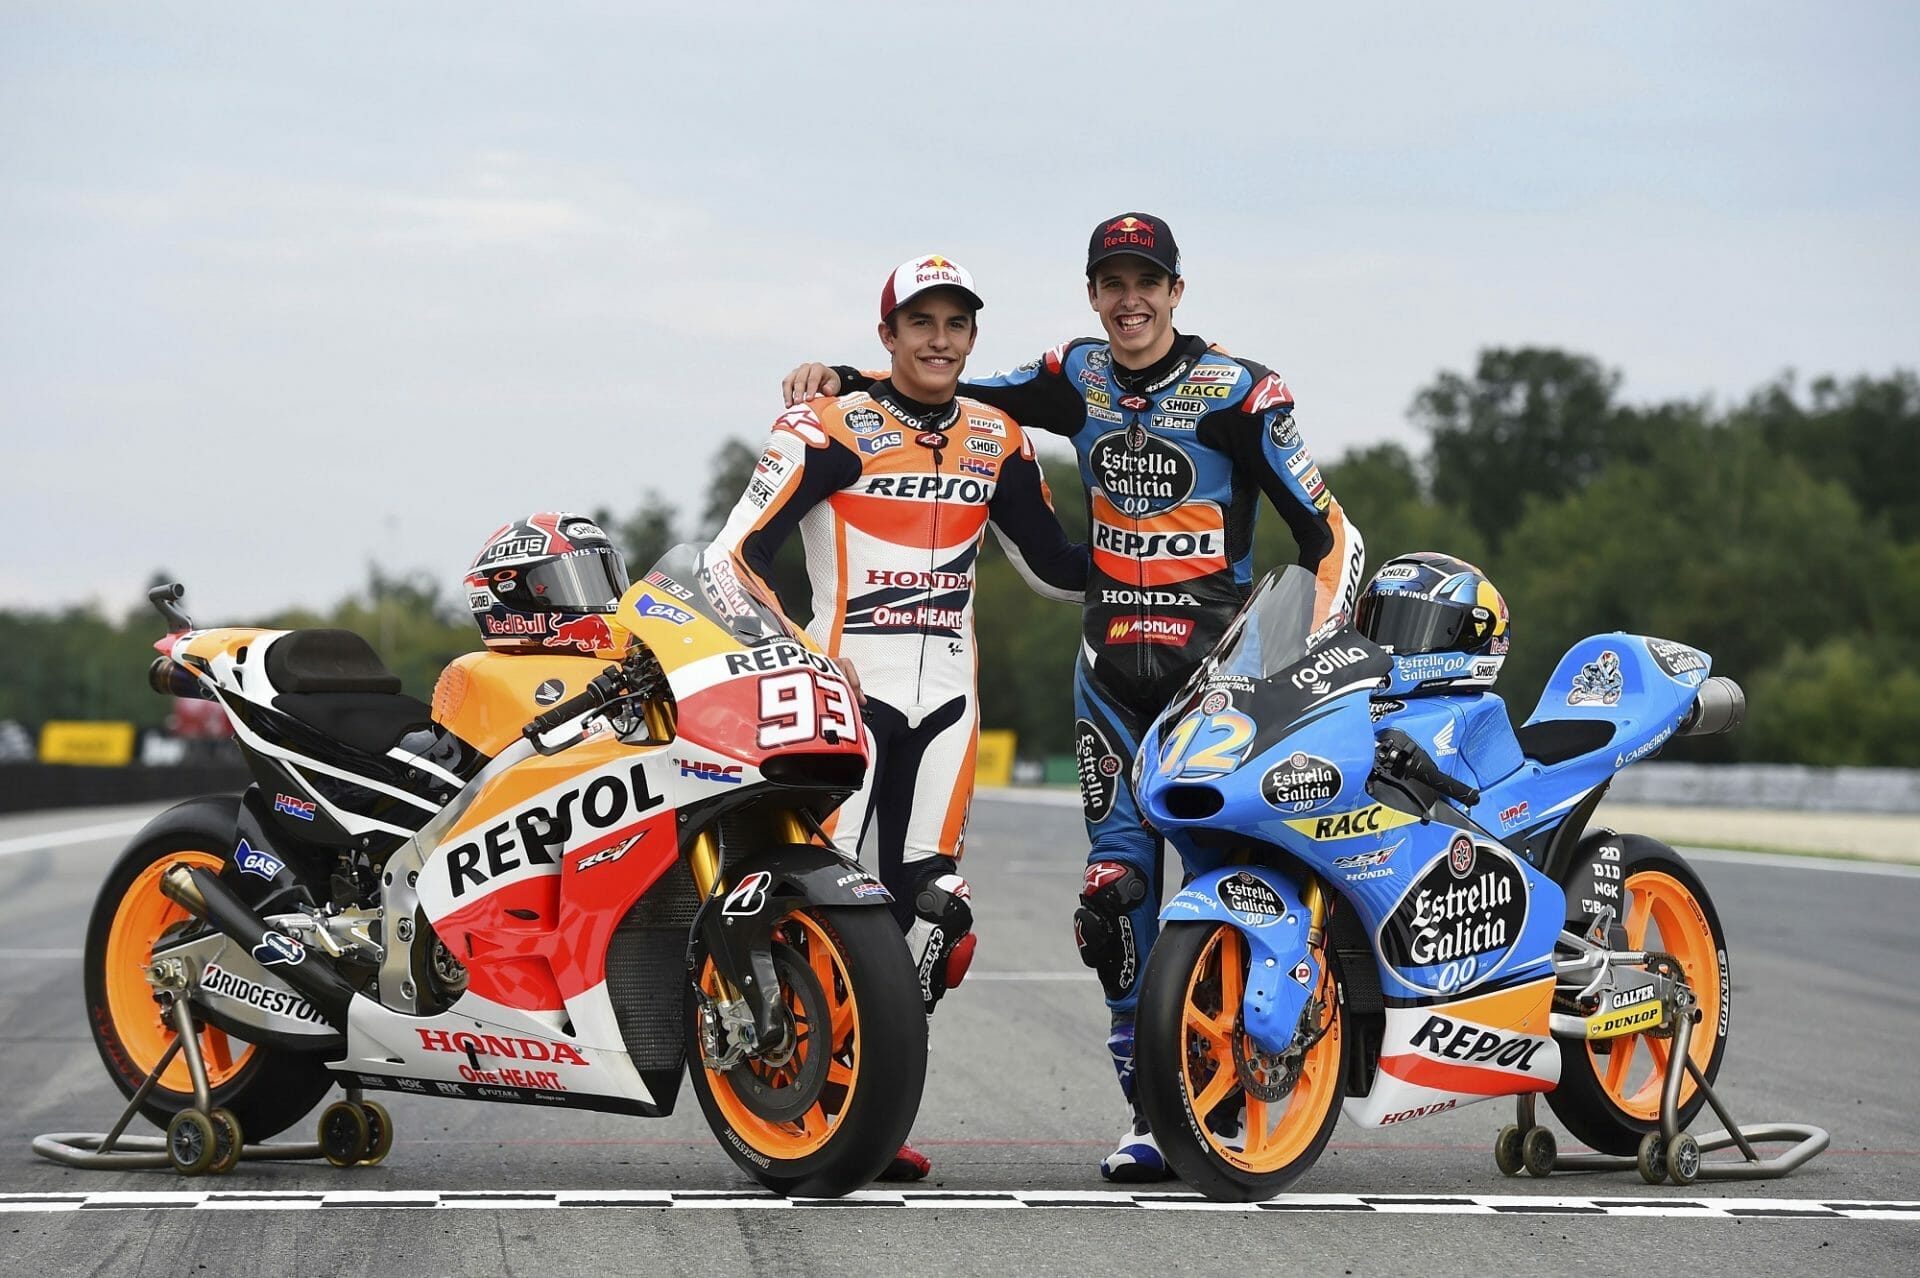 #AlexMarquez drives for #Honda in #MotoGP
- also in the app Motorcycle News